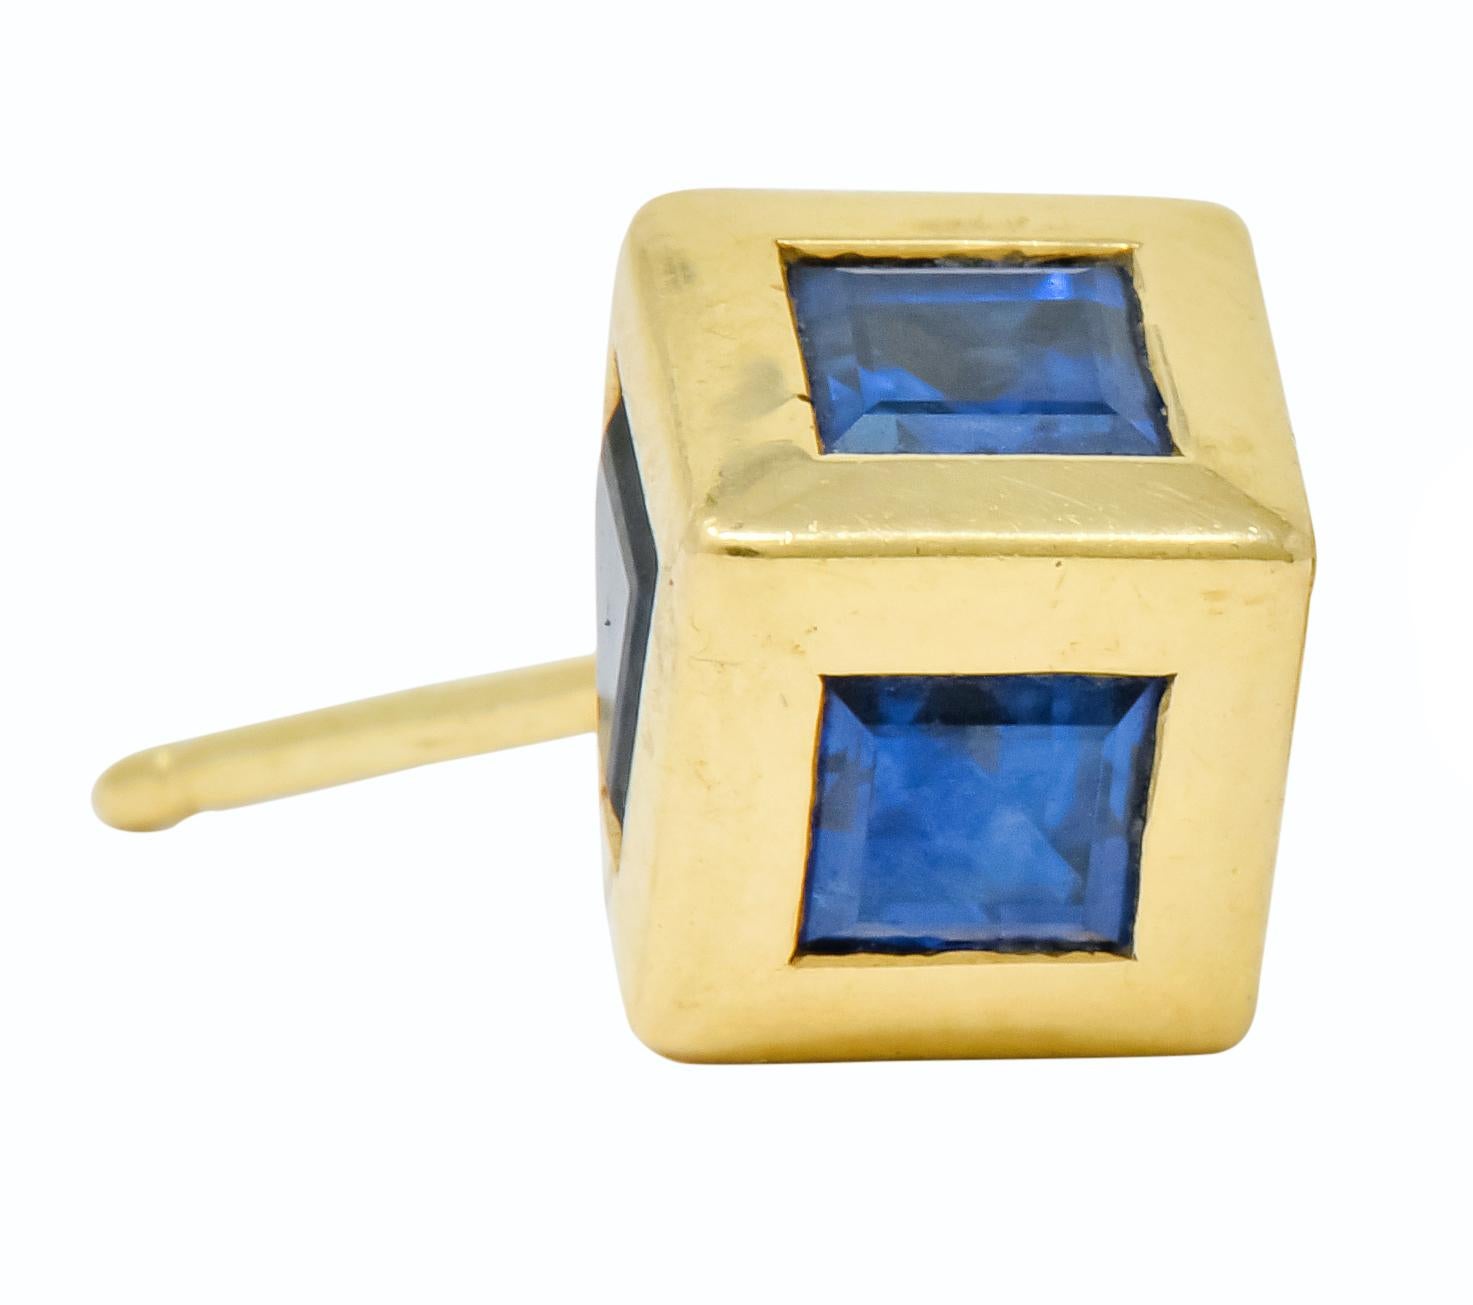 Featuring bezel set calibré cut sapphires and channel set princess cut diamonds in a multi dimensional “tumbling block” design

Diamonds weigh approximately 0.45 carat total, F/G color and VS clarity

Sapphires weigh approximately 2.10 carat total,